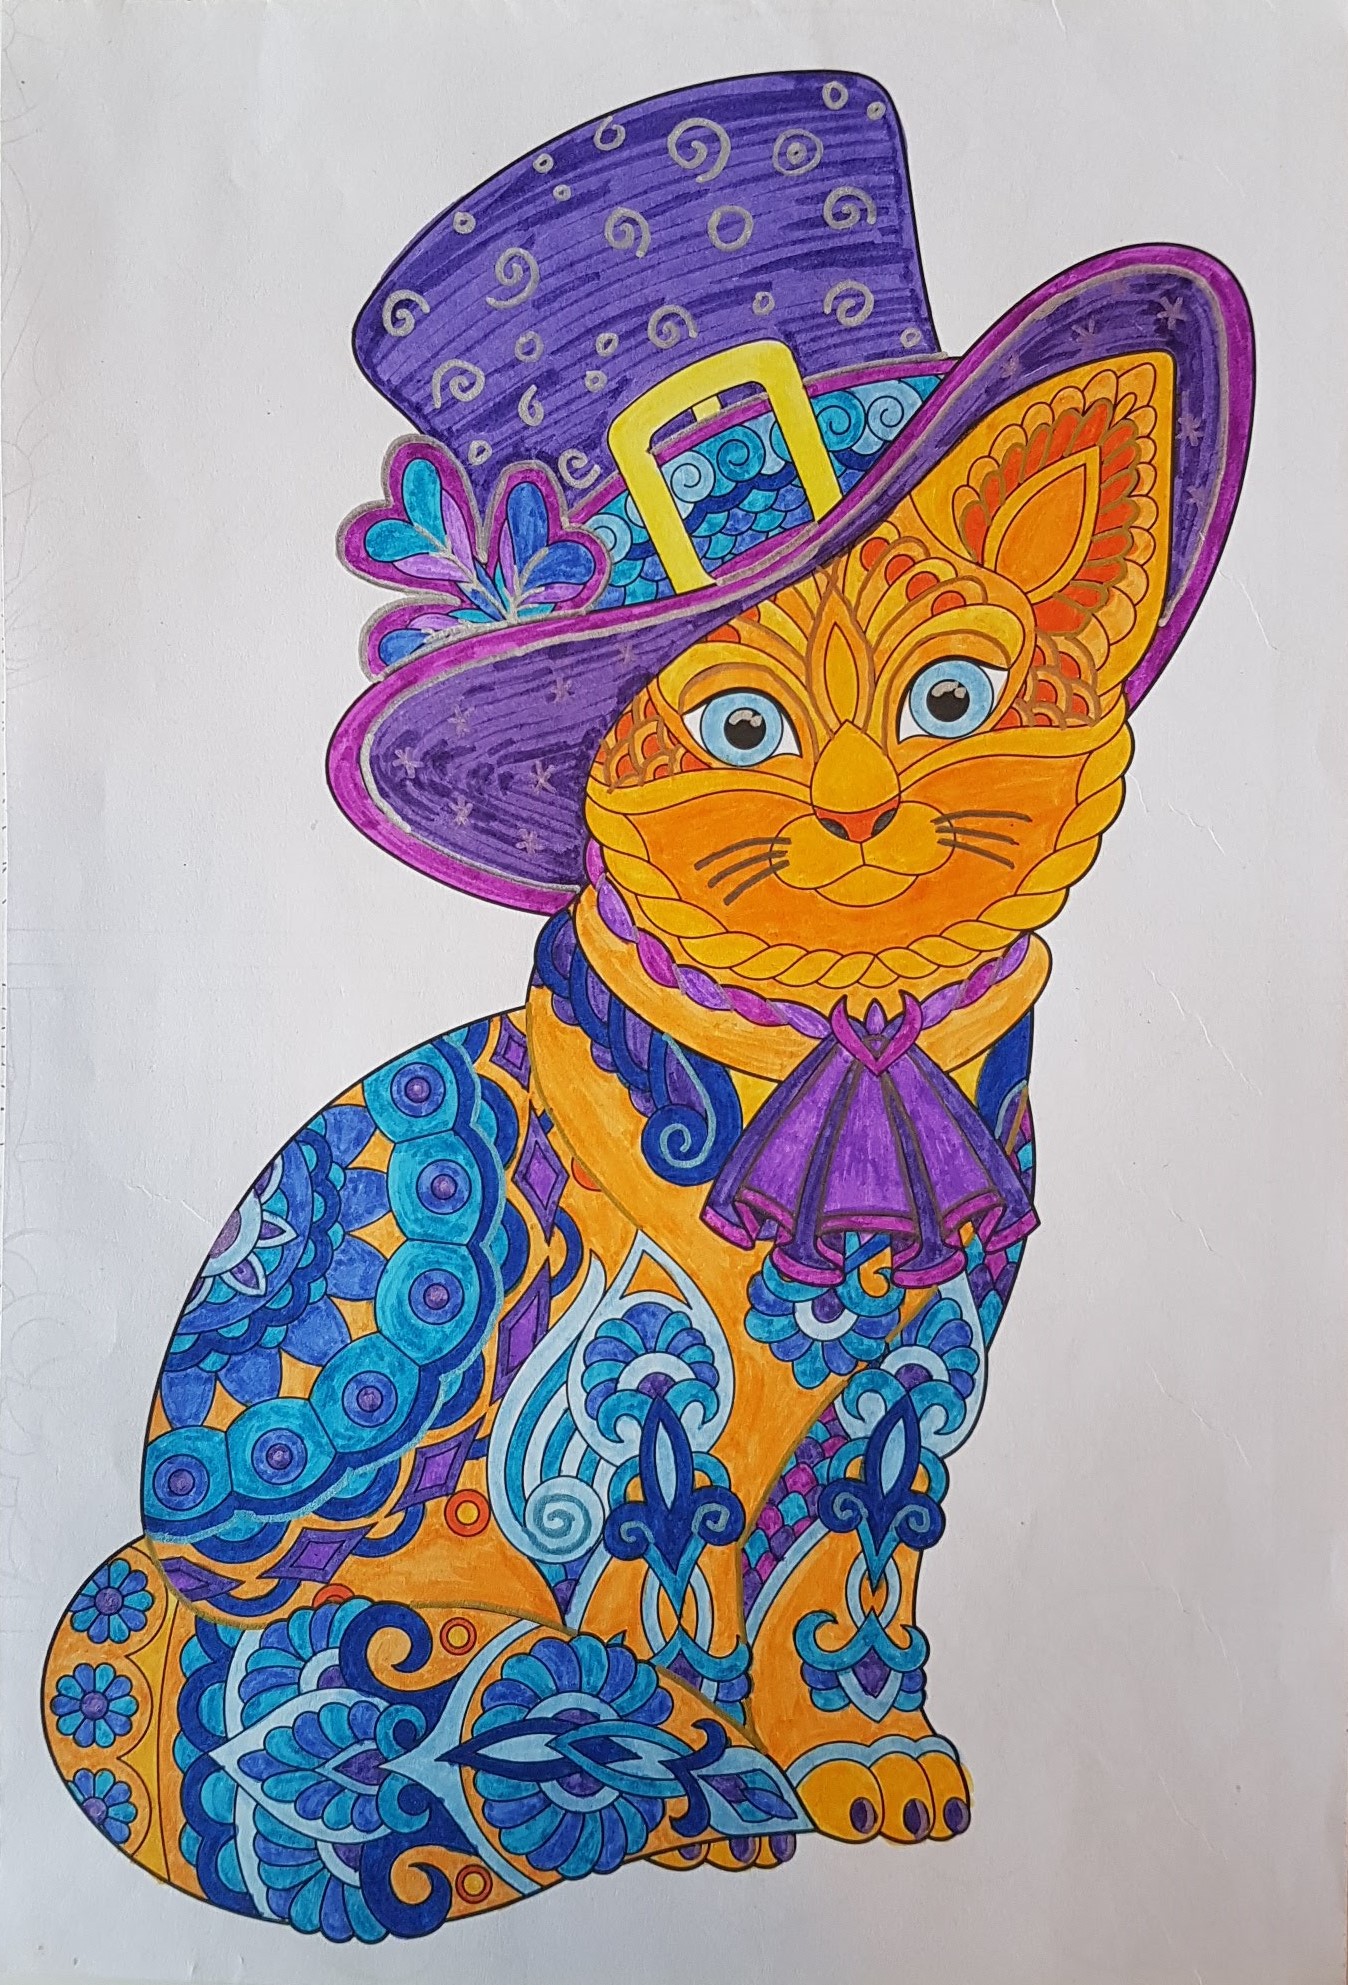 Cat with orange body fur, wearing a purple top hat and fancy collar, with artistic blue markings on its fur